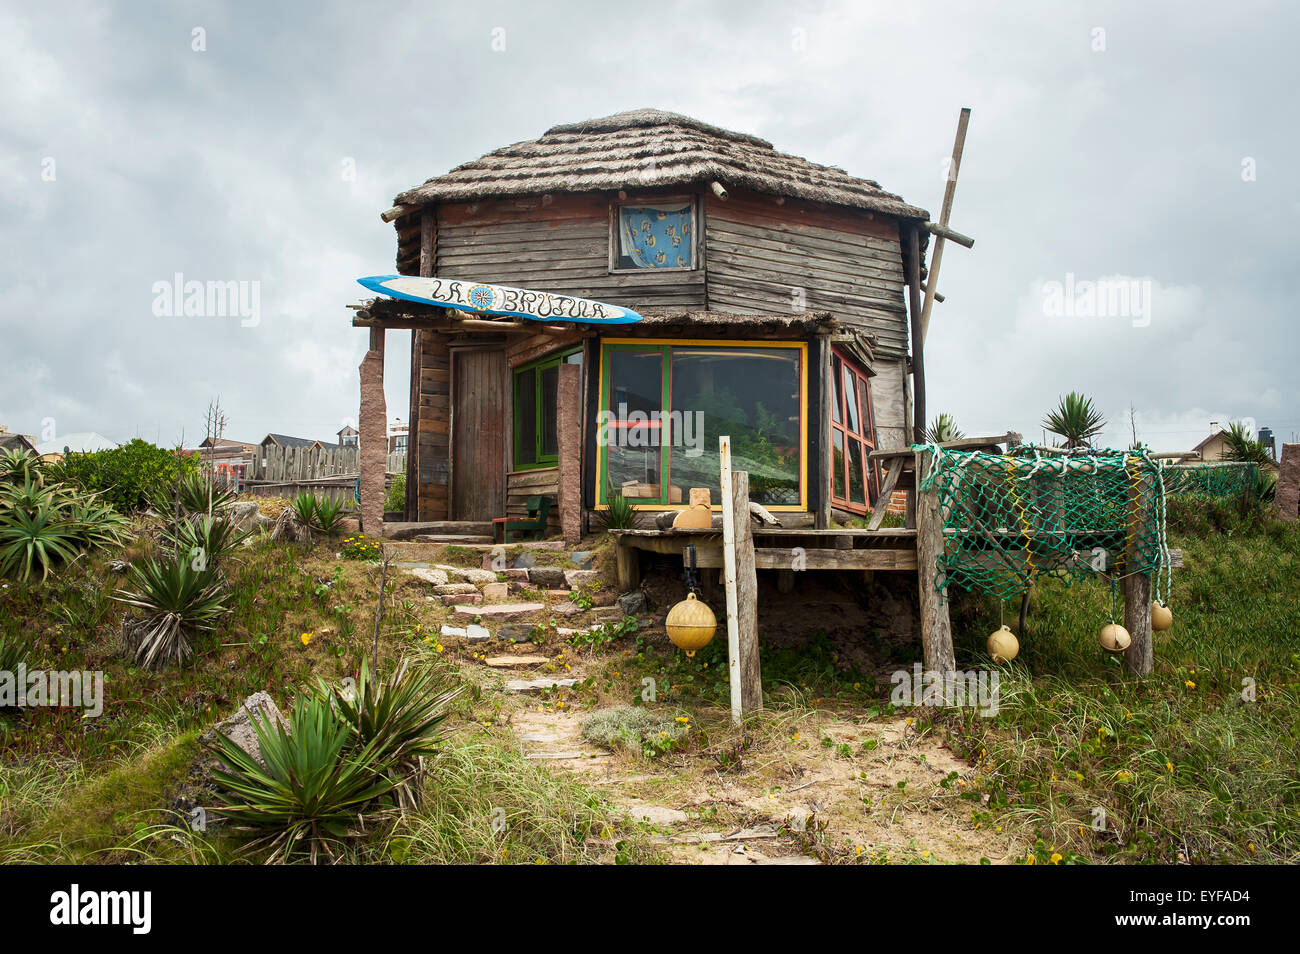 Weathered wooden house off the beach; Punta del Diablo, Uruguay Stock Photo